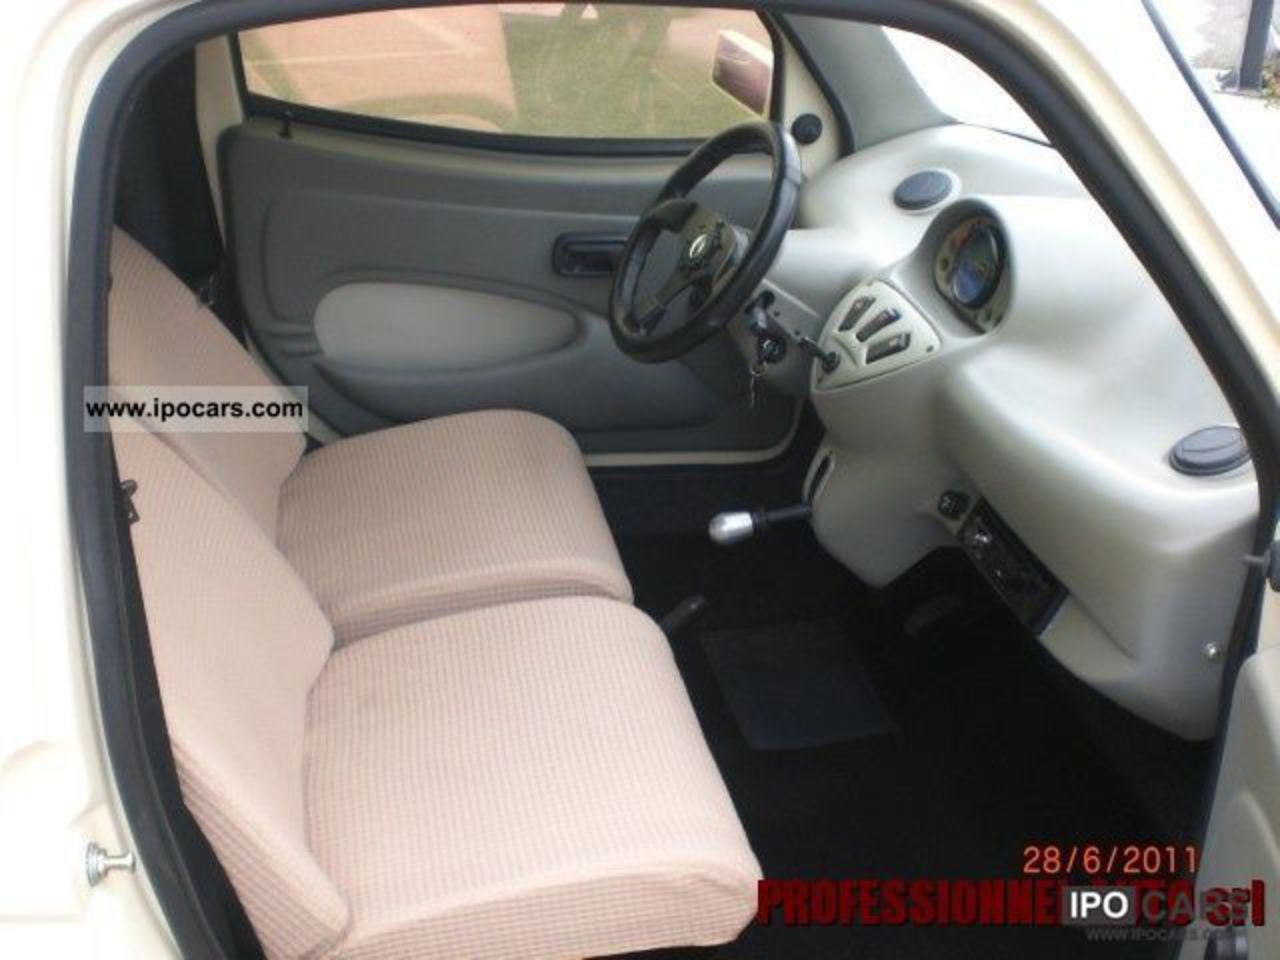 2004 Aixam 500 TOWN LIFE GINEVRA - Car Photo and Specs